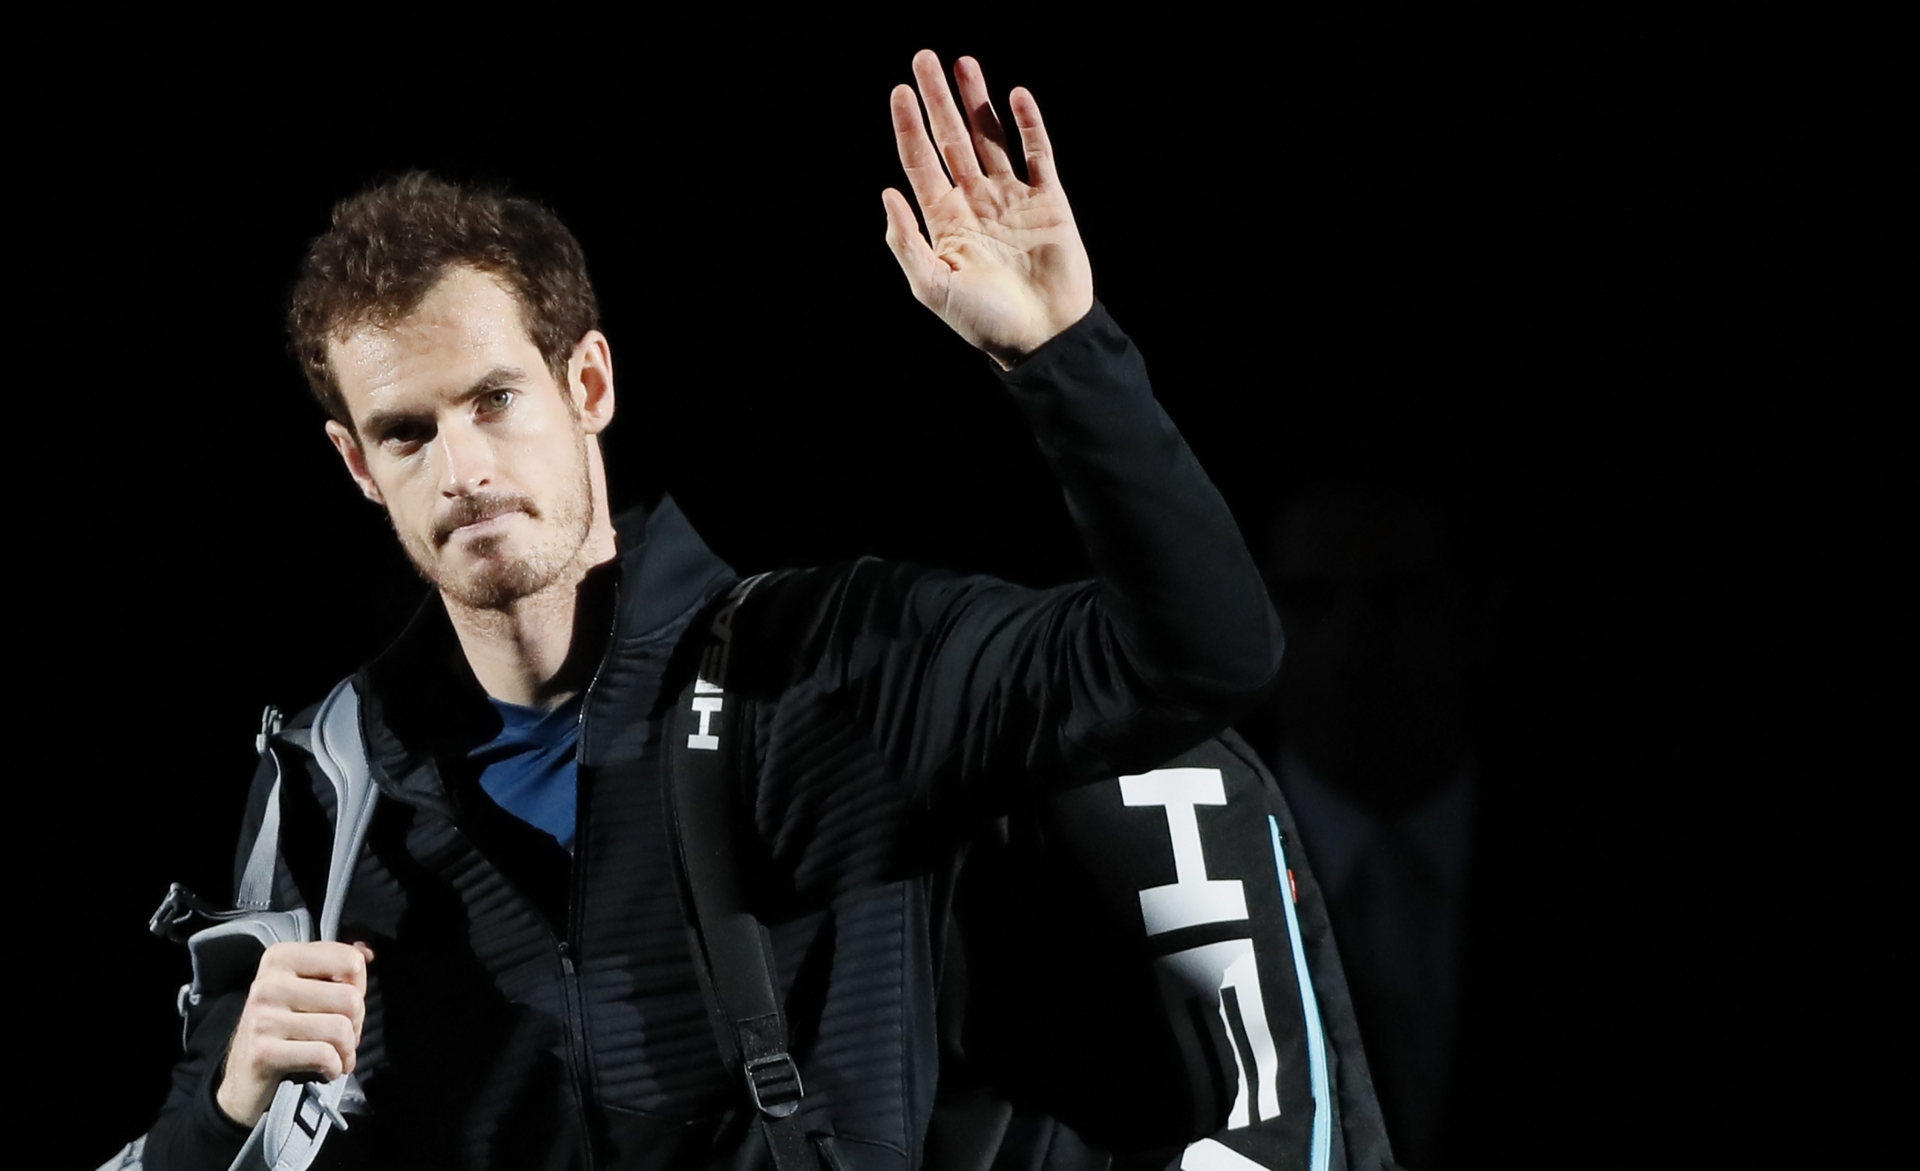 epa05619832 Andy Murray of Britain arrives for the final match against John Isner of the US  at the BNP Paribas 2016 Masters tennis tournament in Paris, France, 06 November 2016.  EPA/IAN LANGSDON